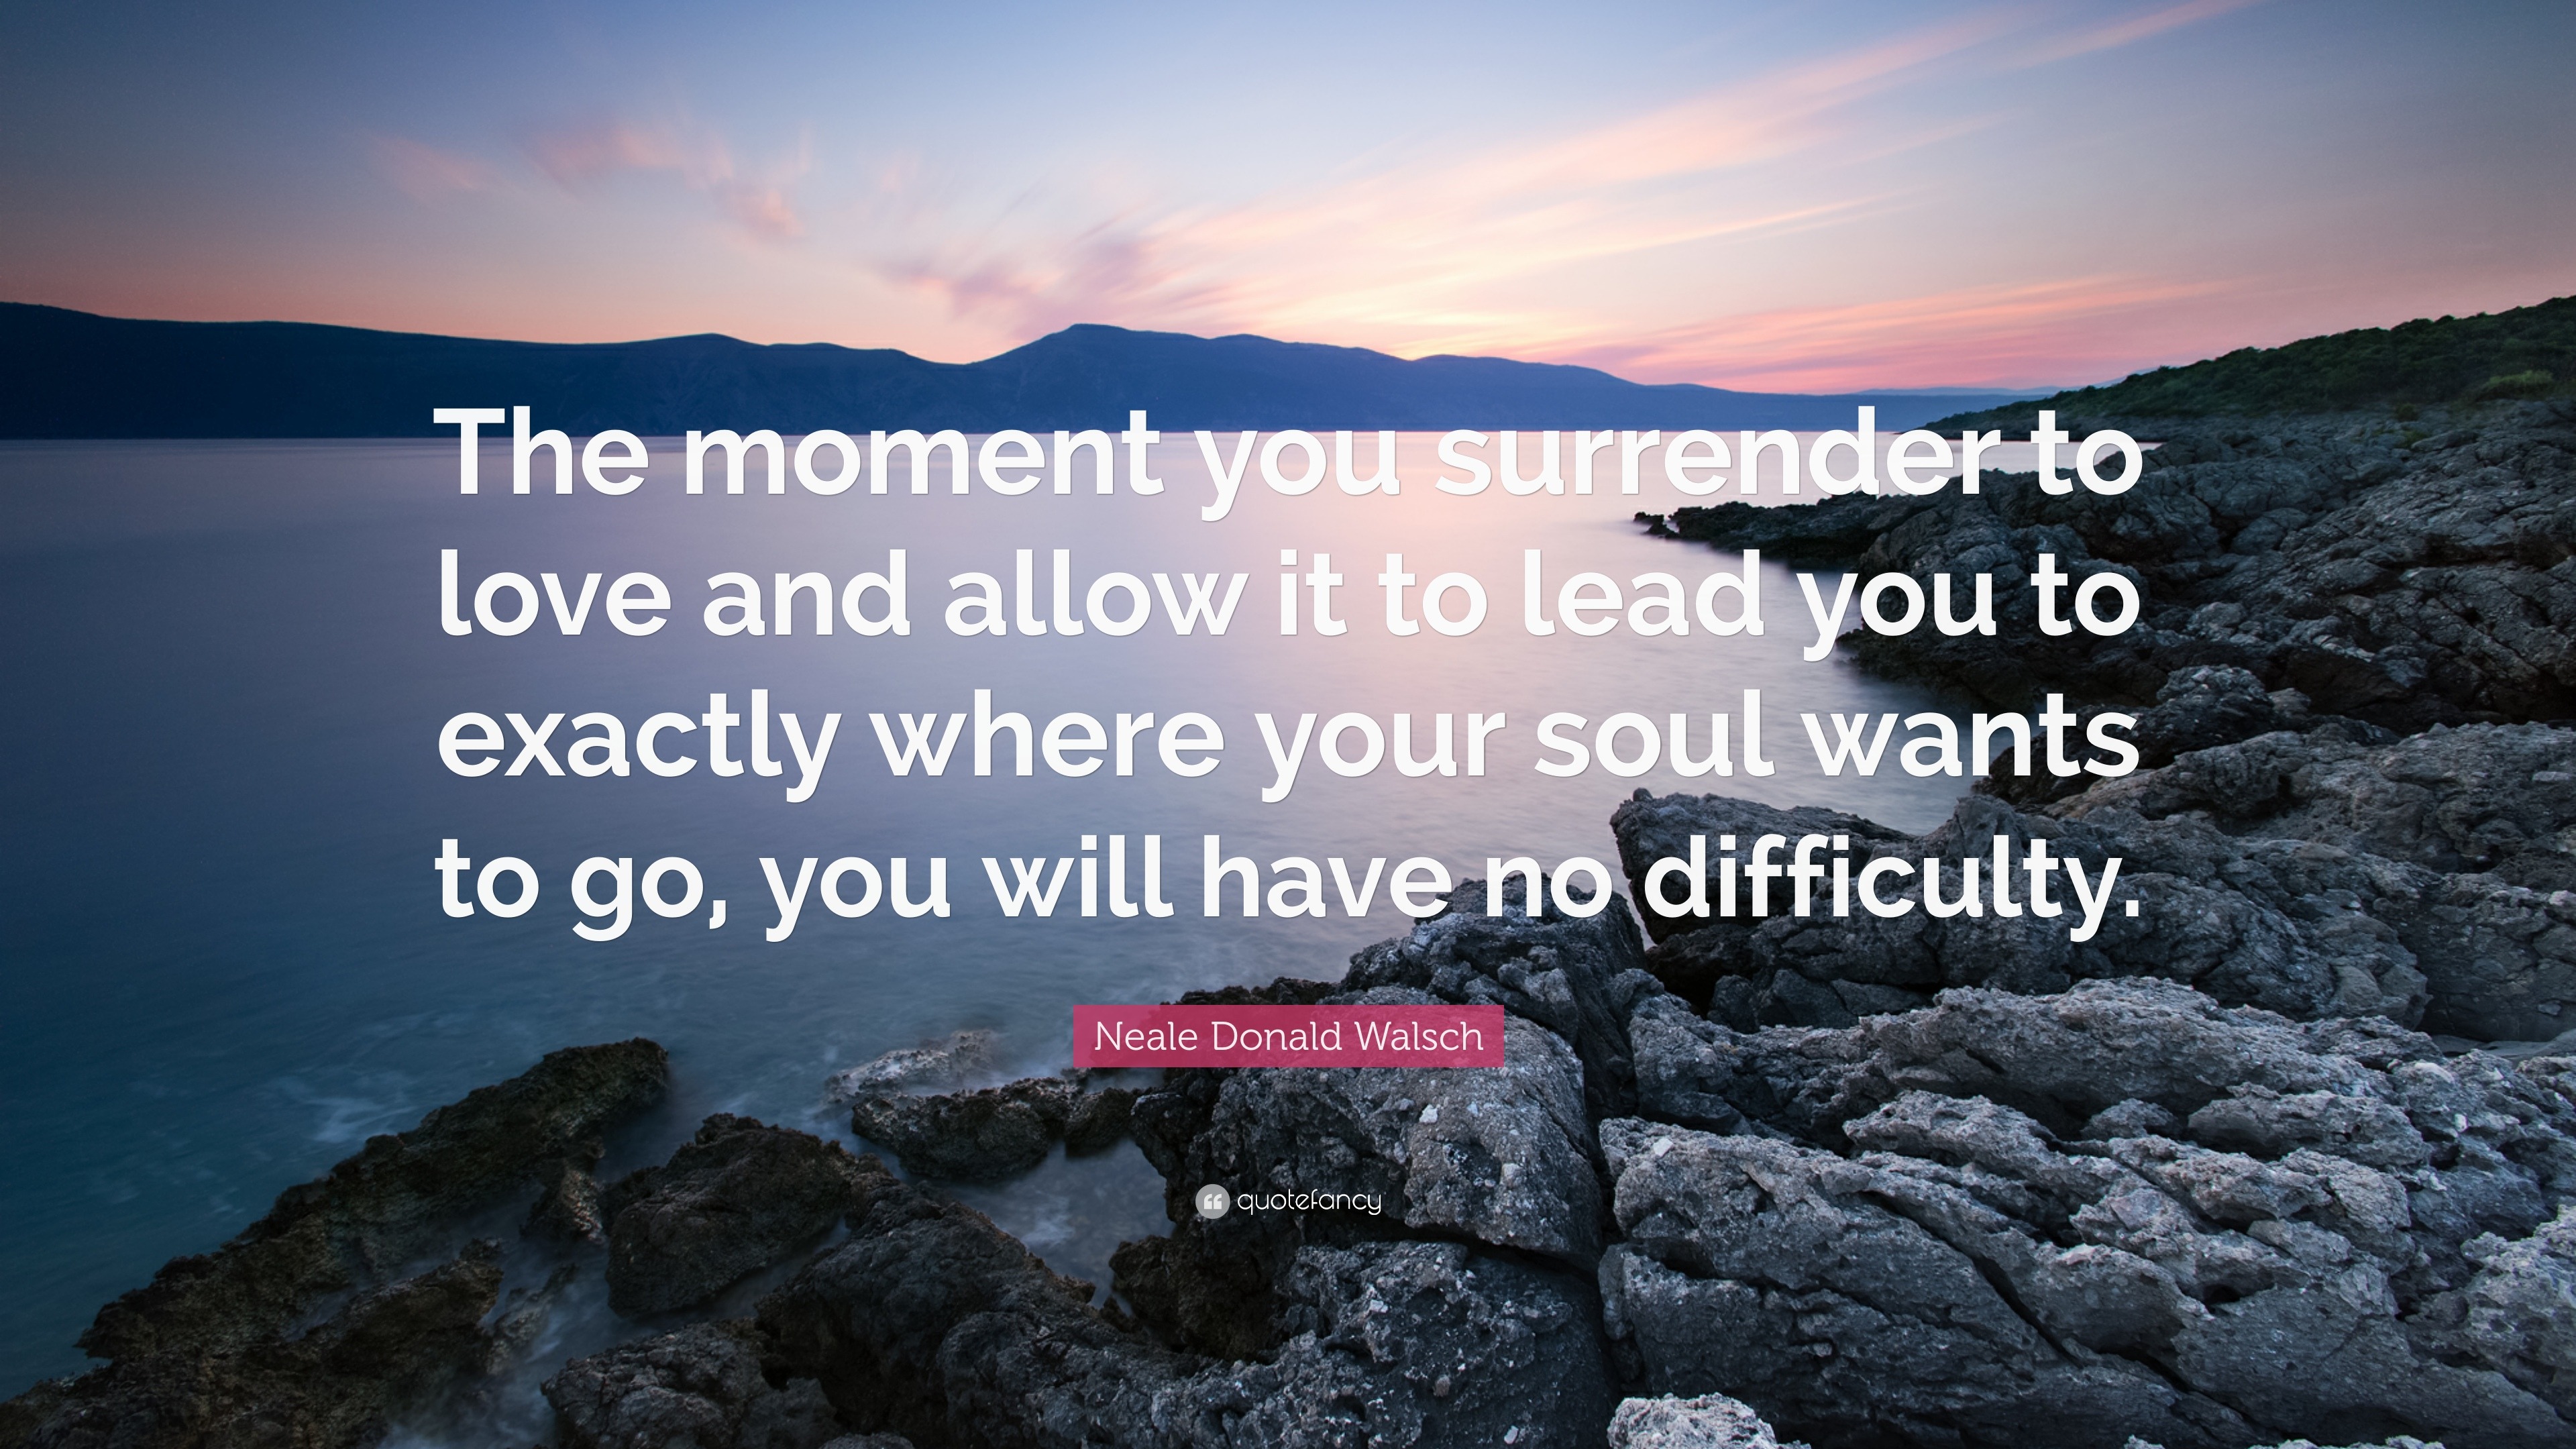 Neale Donald Walsch Quote: "The moment you surrender to ...